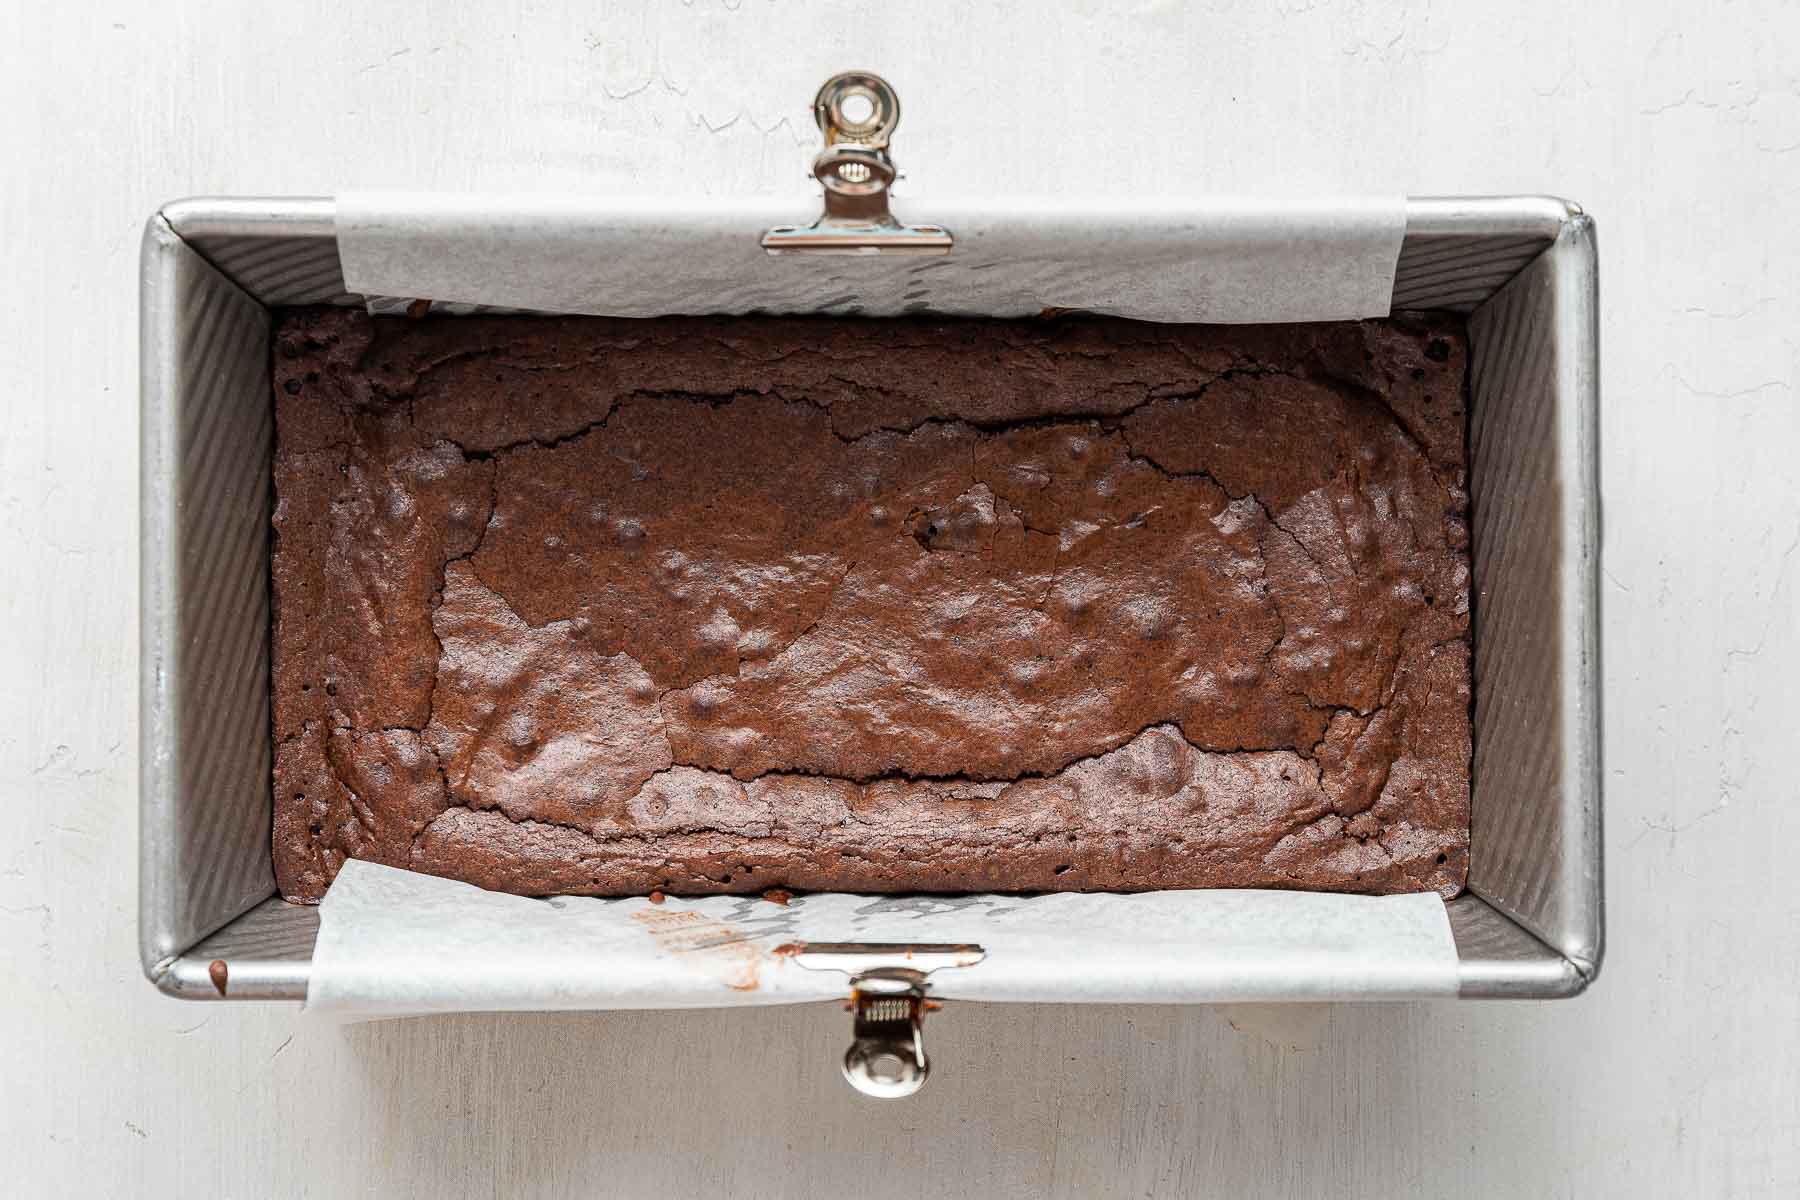 Small Batch Brownies in a Loaf Pan - Katiebird Bakes